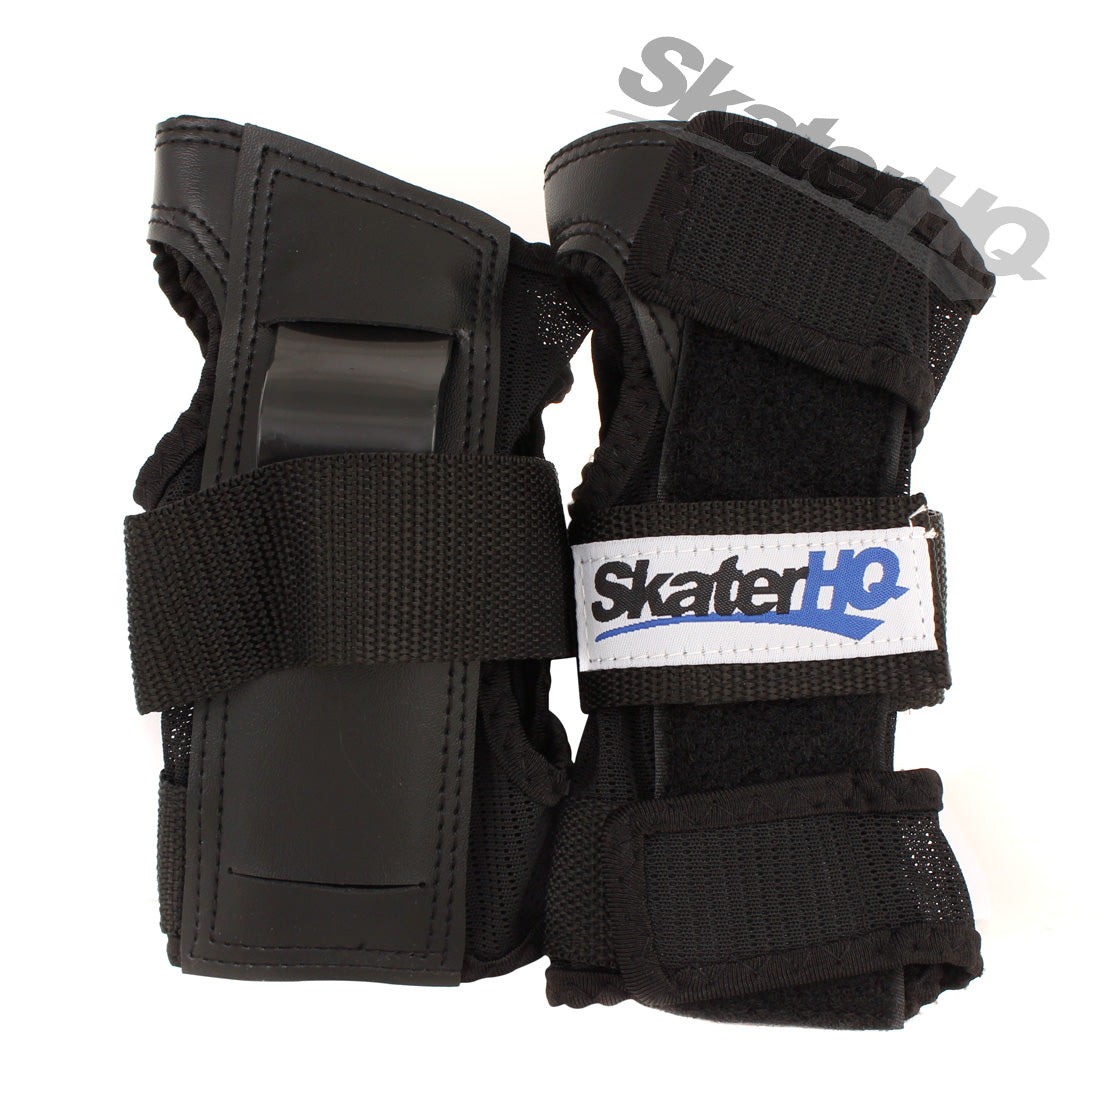 Skater HQ Wrist Guard - Large Protective Gear